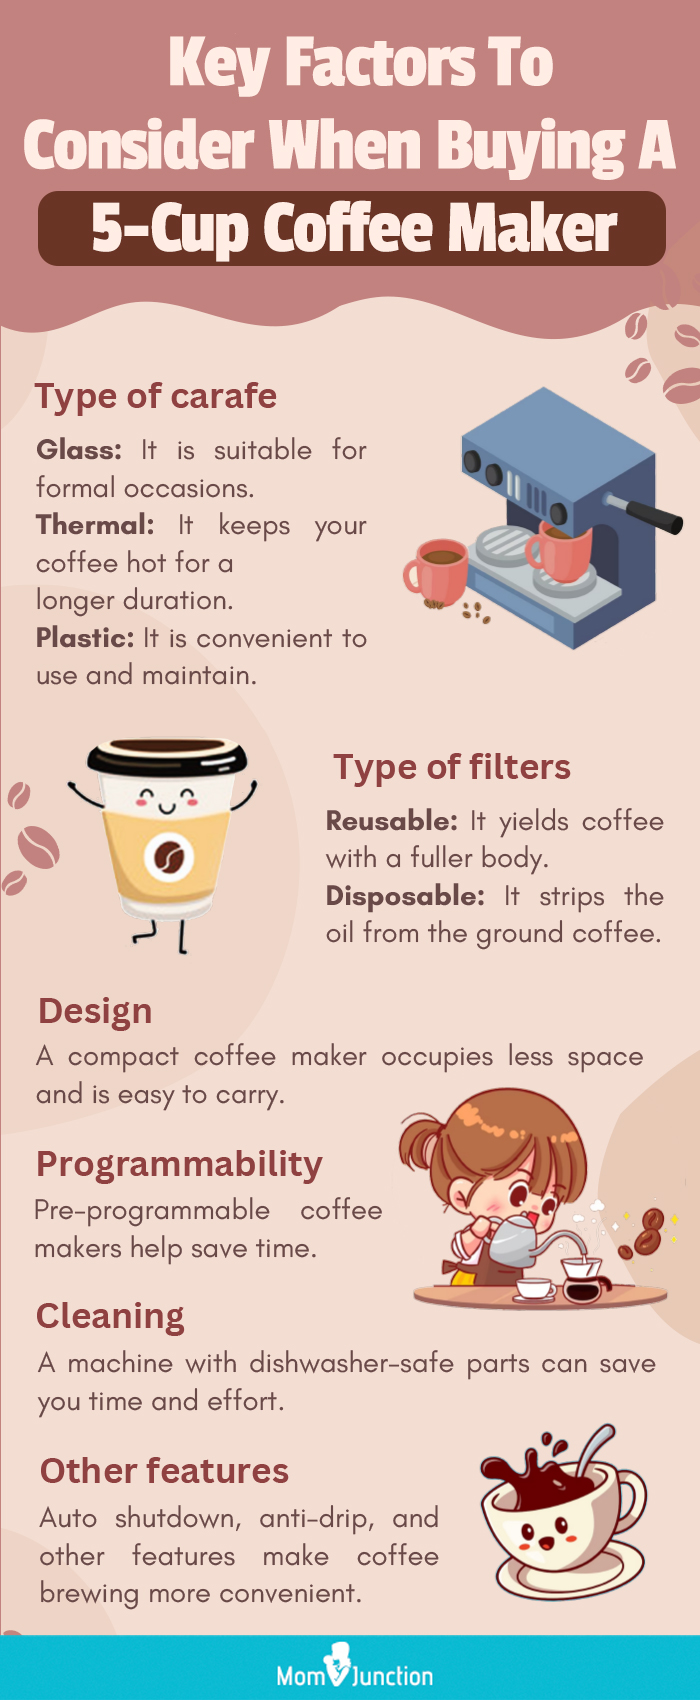 Key Factors To Consider When Buying A 5-Cup Coffee Maker00 (infographic)